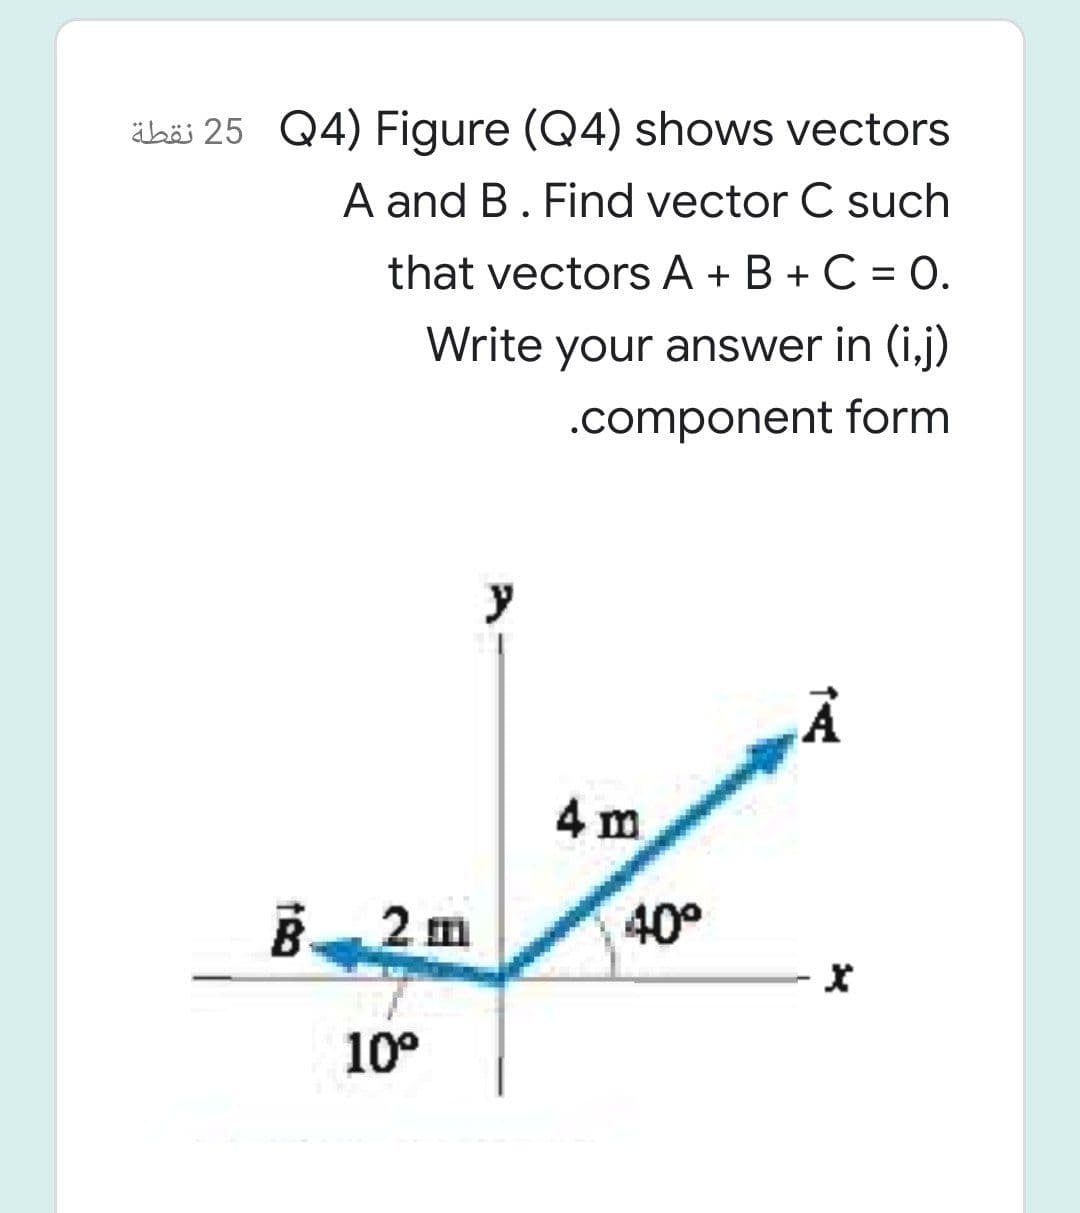 äbäi 25 Q4) Figure (Q4) shows vectors
A and B. Find vector C such
that vectors A + B + C = 0.
Write your answer in (i,j)
.component form
y
4 m
B 2 m
40°
10°
